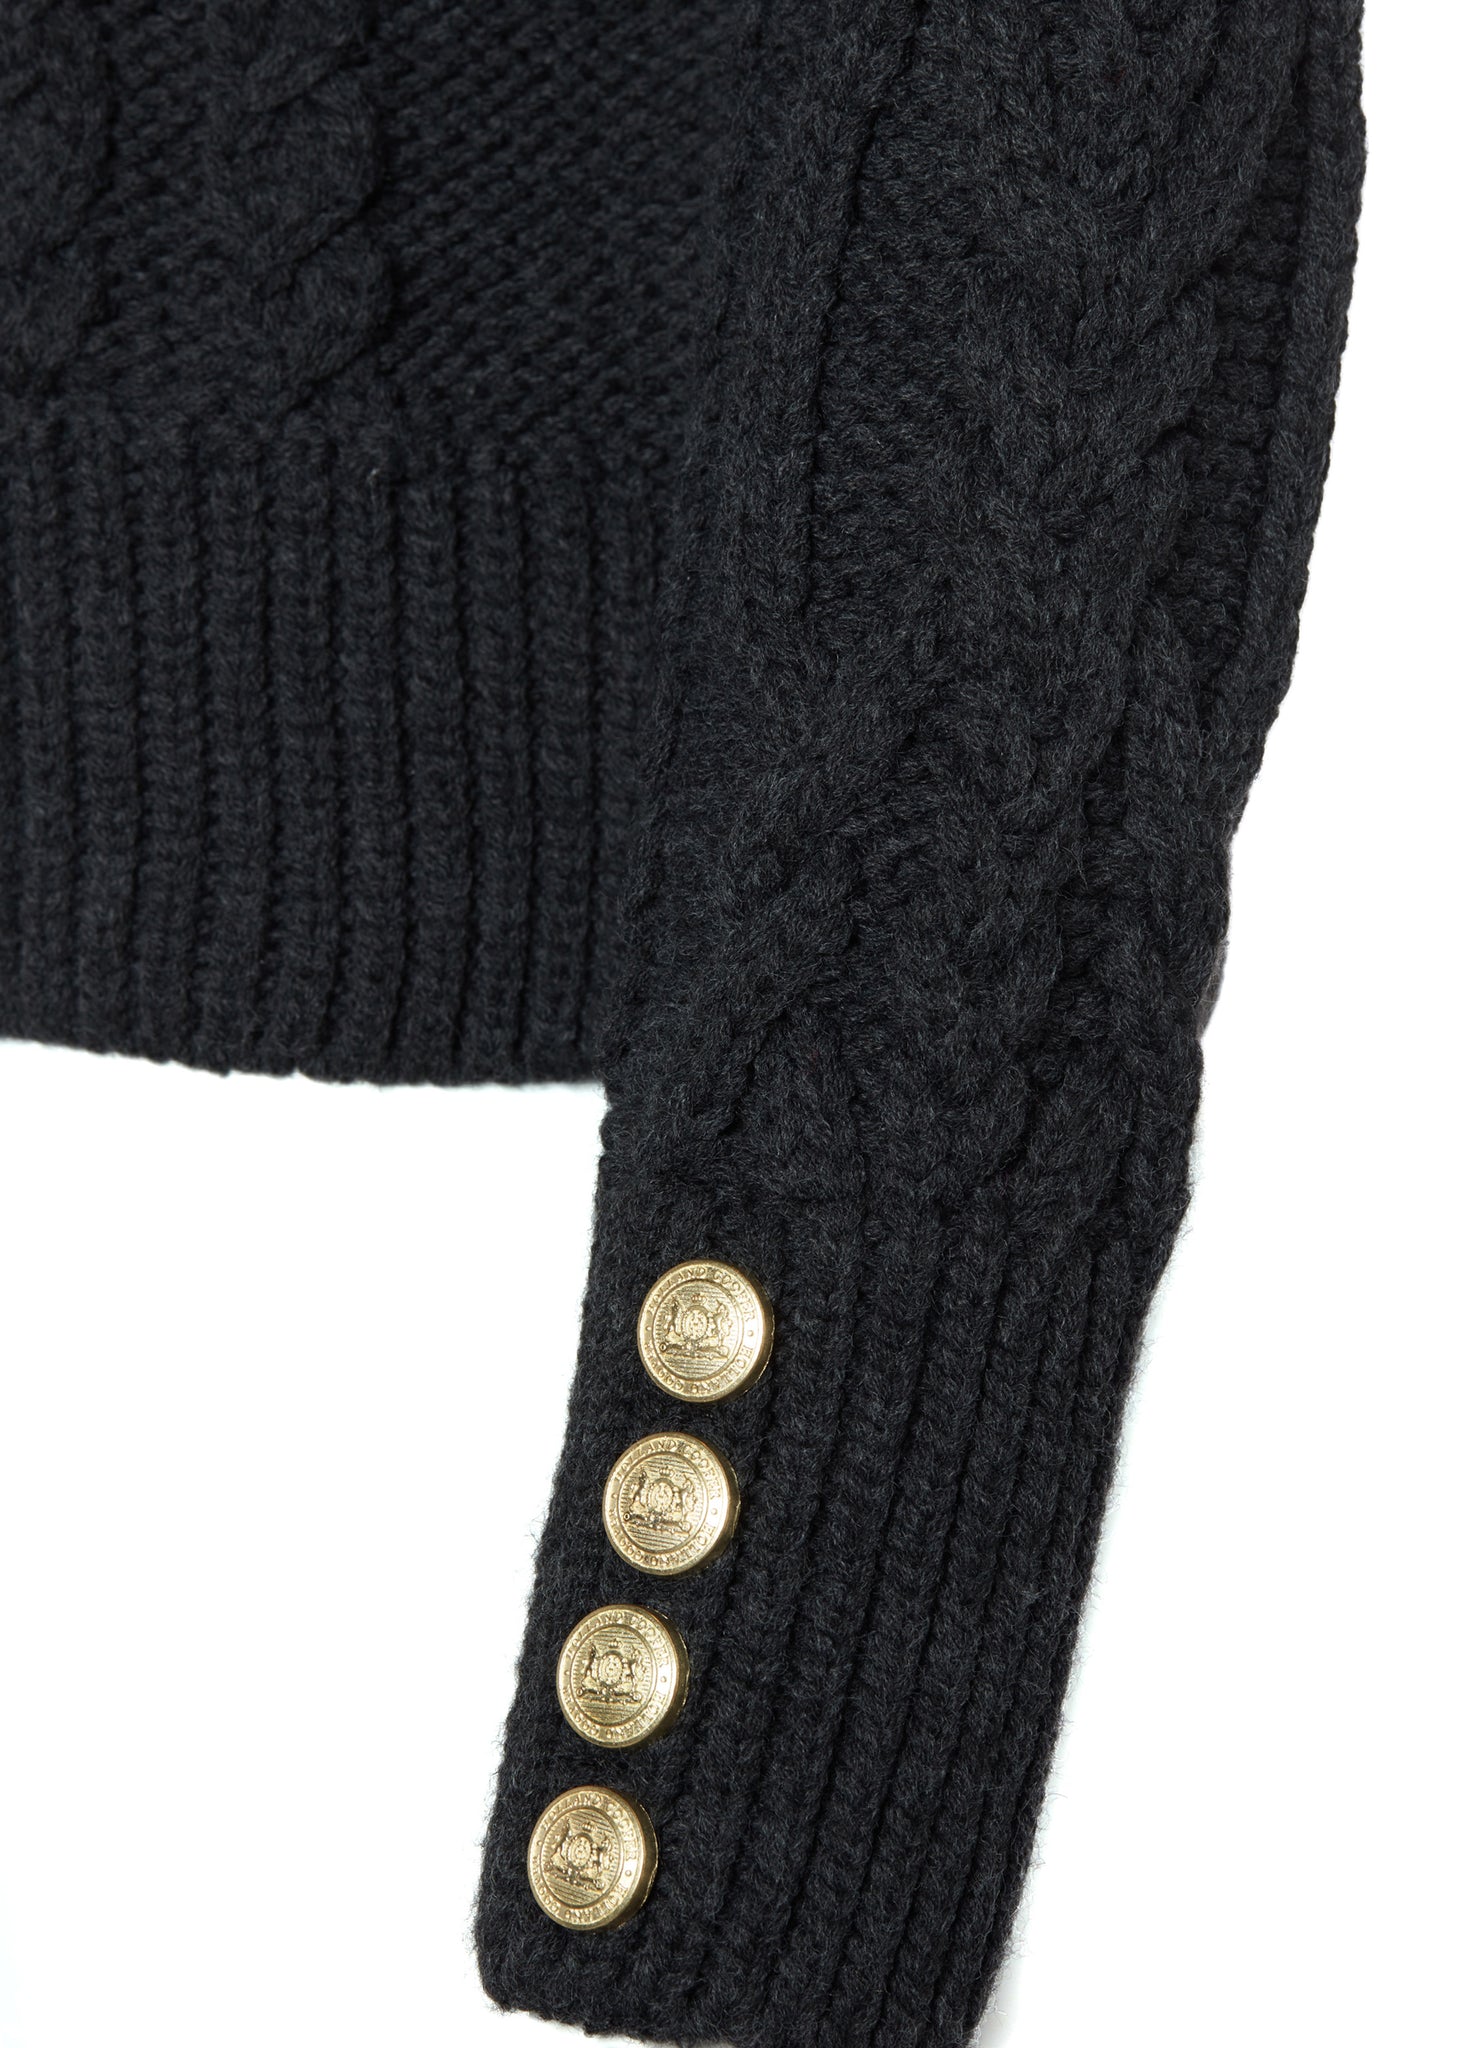 gold button detail on cuffs of a chunky cable knit roll neck jumper in dark grey with dropped shoulders and thick ribbed cable trims and gold buttons on cuffs and collar